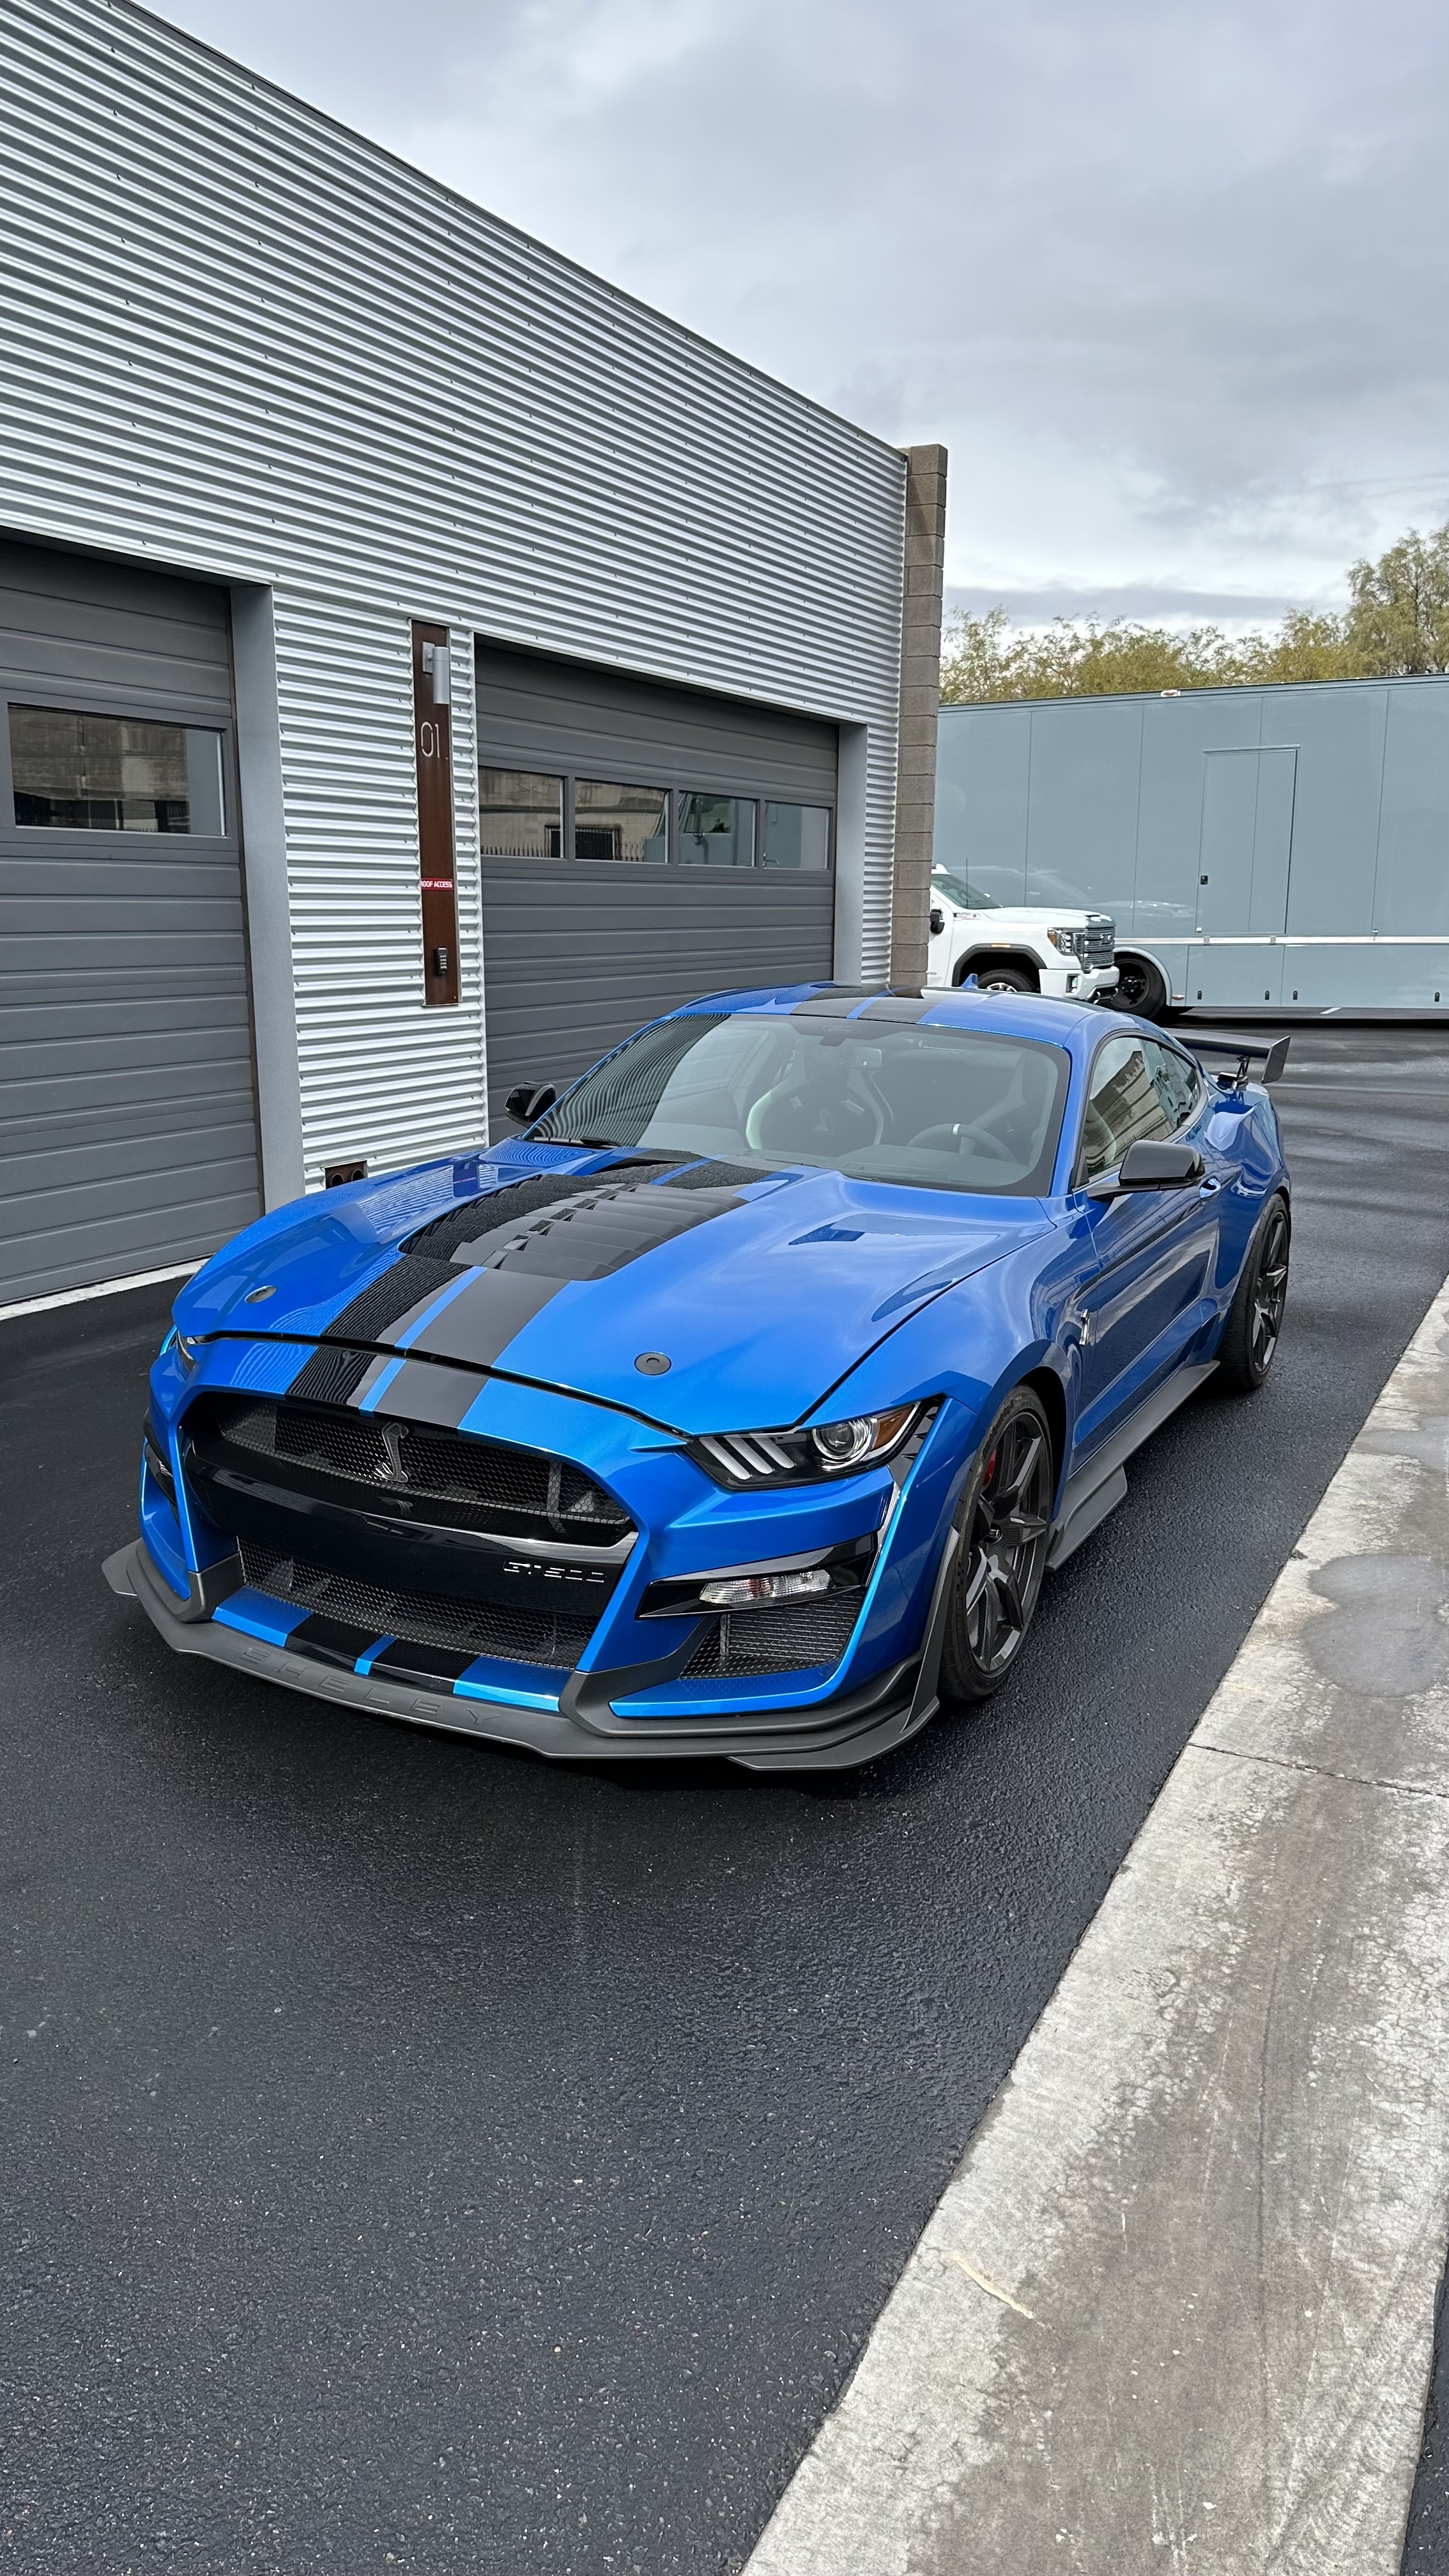 Annonce Ford mustang v 5.4 v8 750 gt500 shelby type supersnake 2012 ESSENCE  occasion - Eschau - Bas-Rhin 67